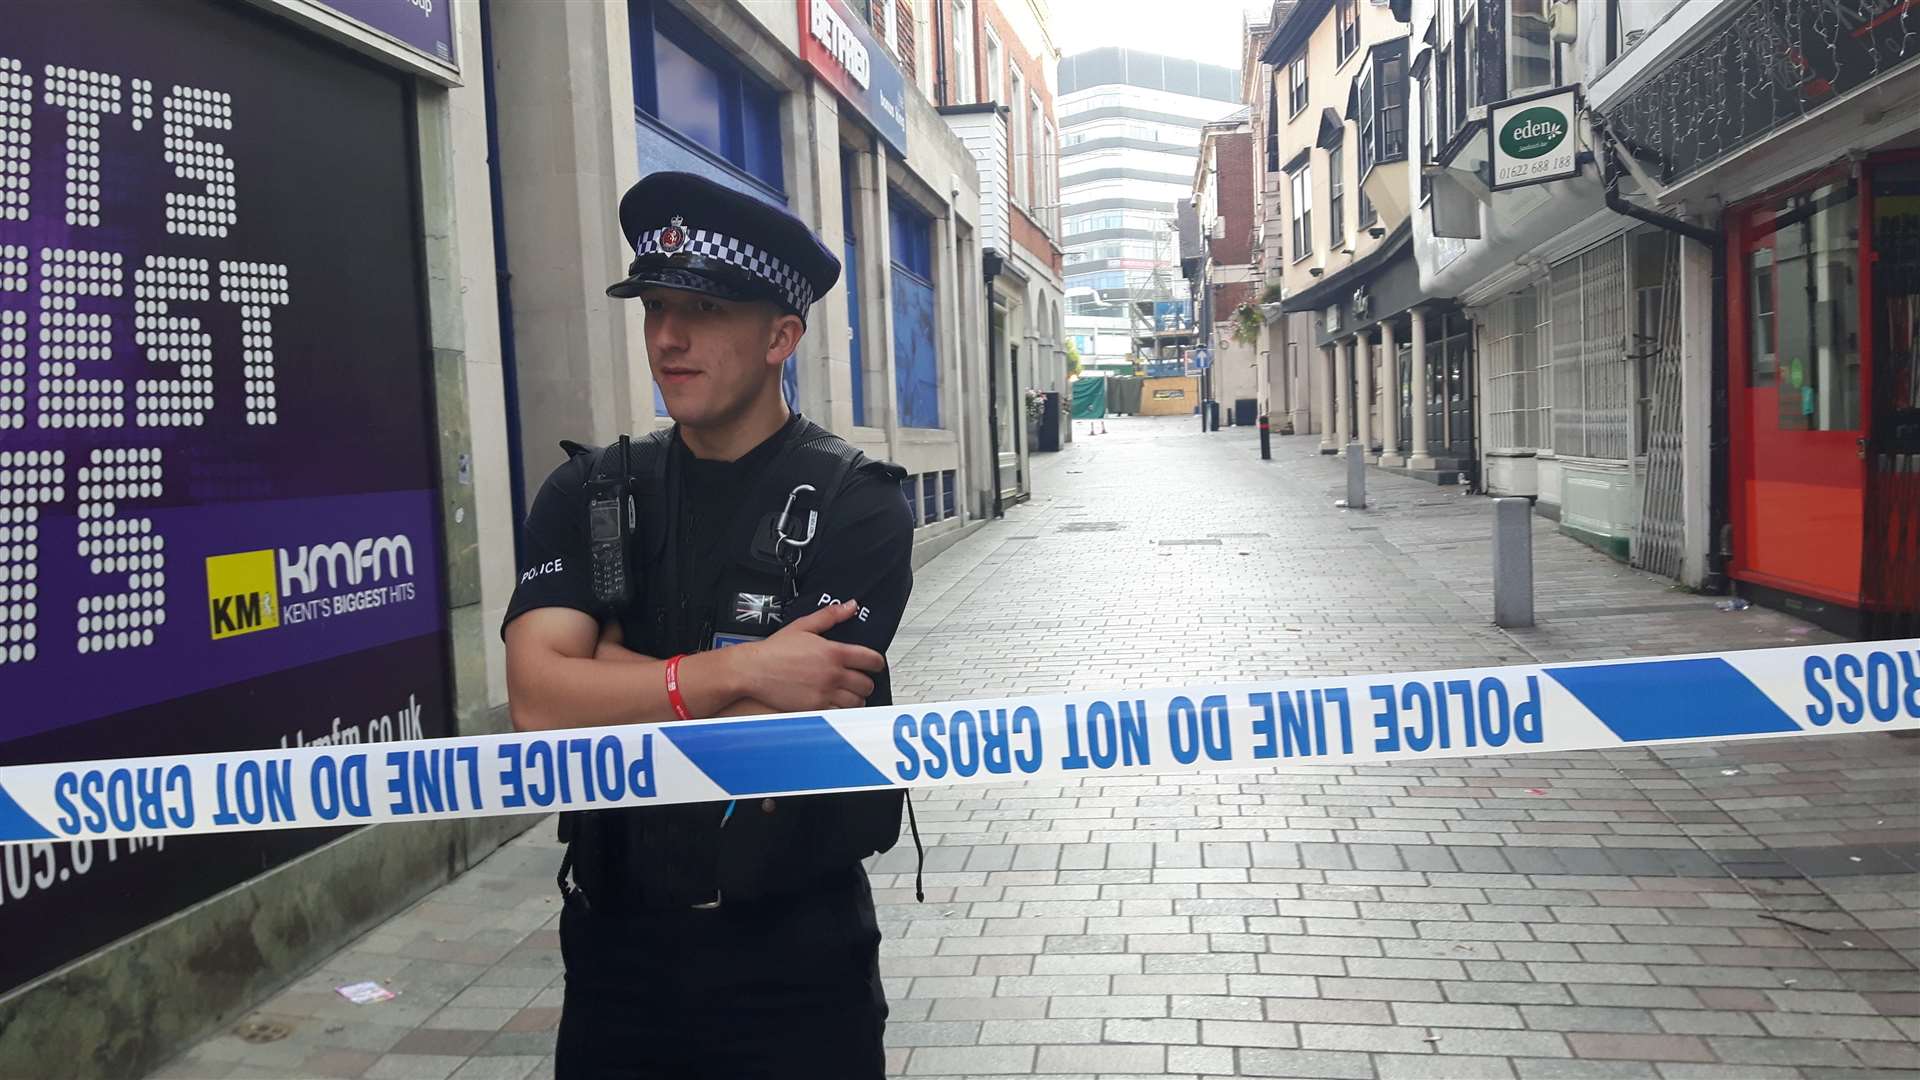 A large section of the town centre was cordoned off